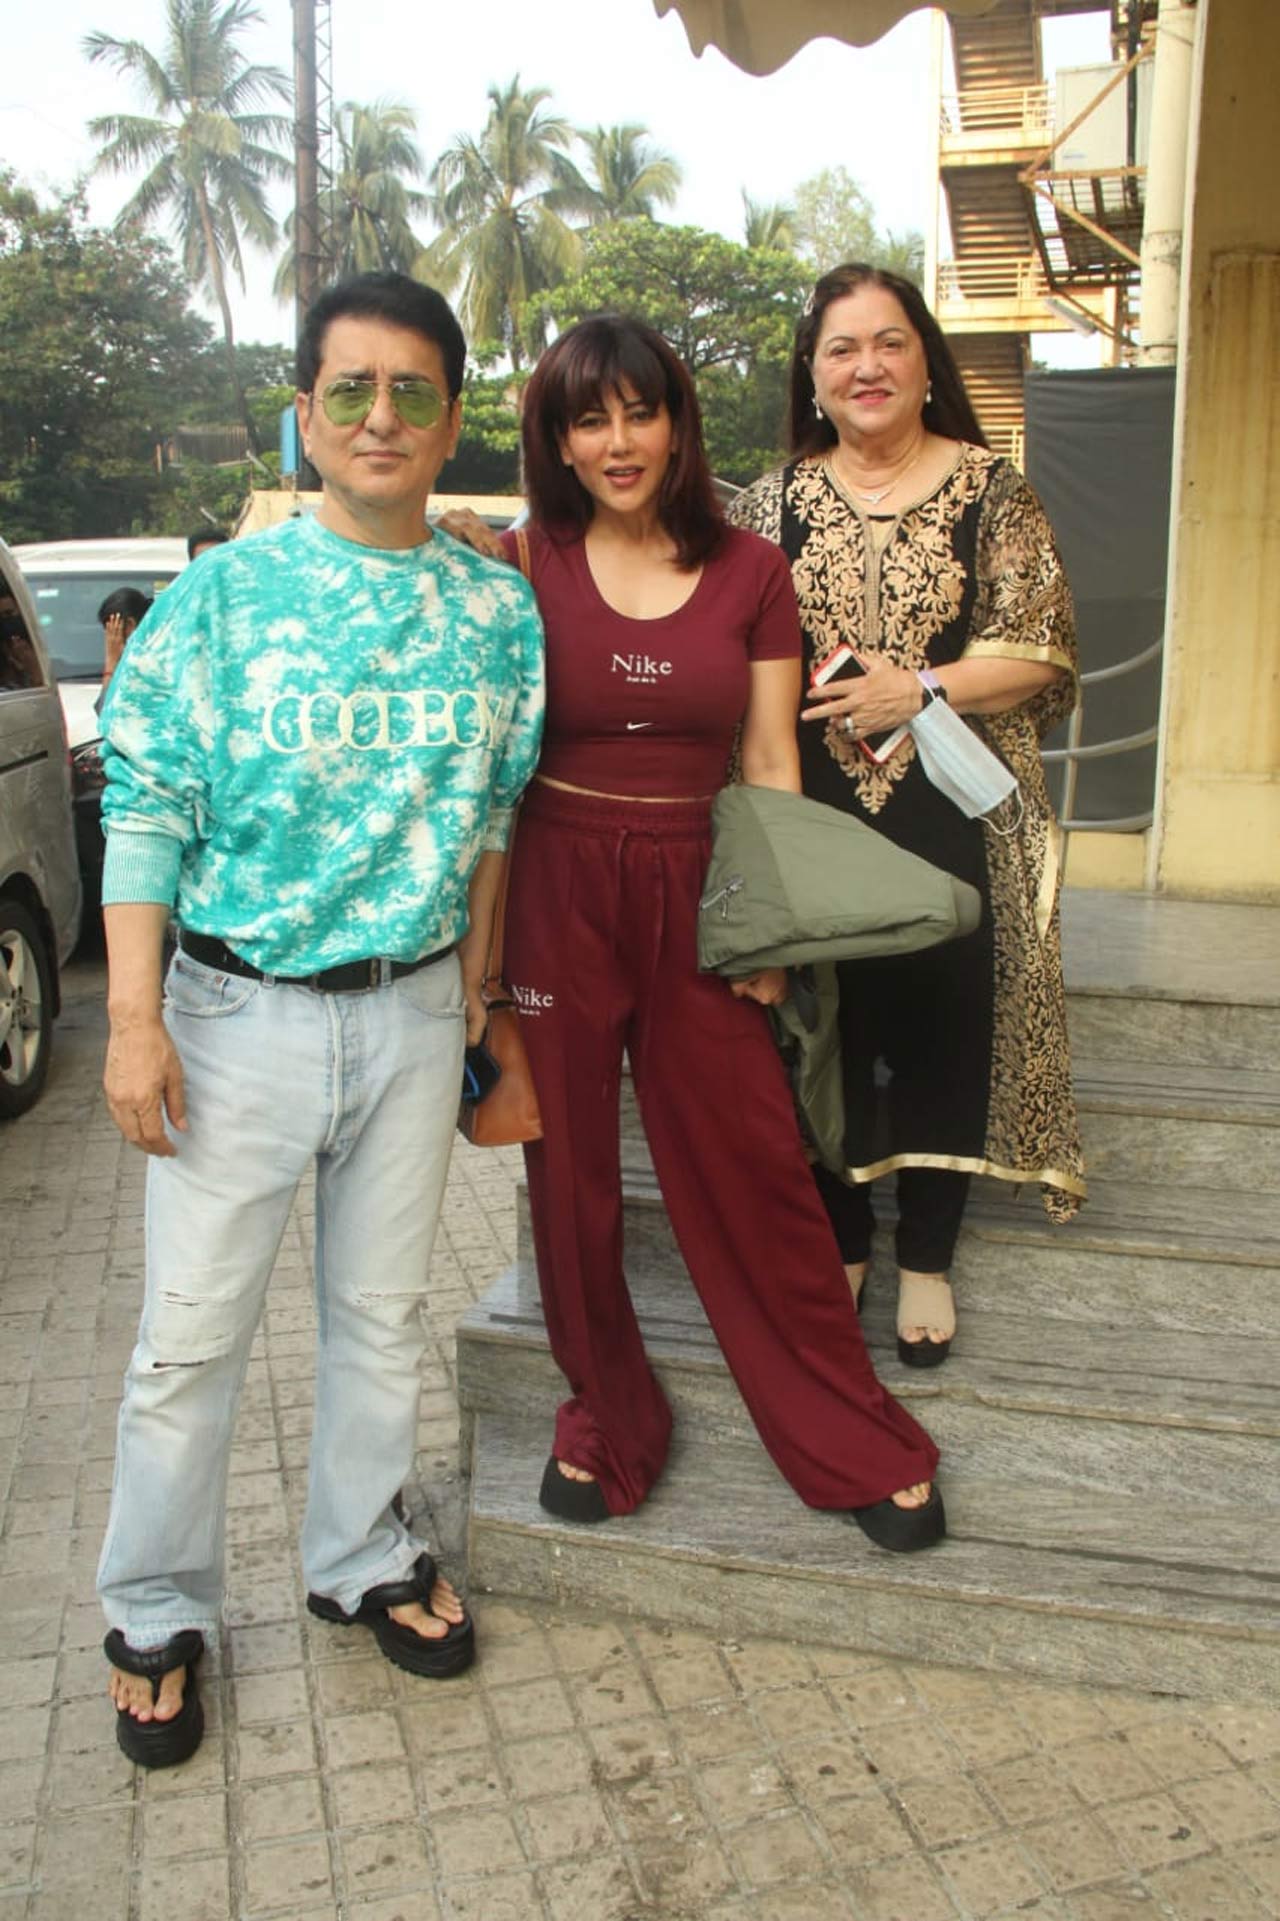 Rohit Shetty's directorial venture finally saw the day of light on November 5, 2021. Akshay Kumar and Katrina Kaif starrer became the first film to release after a hiatus of seven to eight months in Maharashtra. Sajid Nadiadwala, his wife Wardha Nadiadwala and his mother were snapped at Juhu PVR for the special screening of the film.